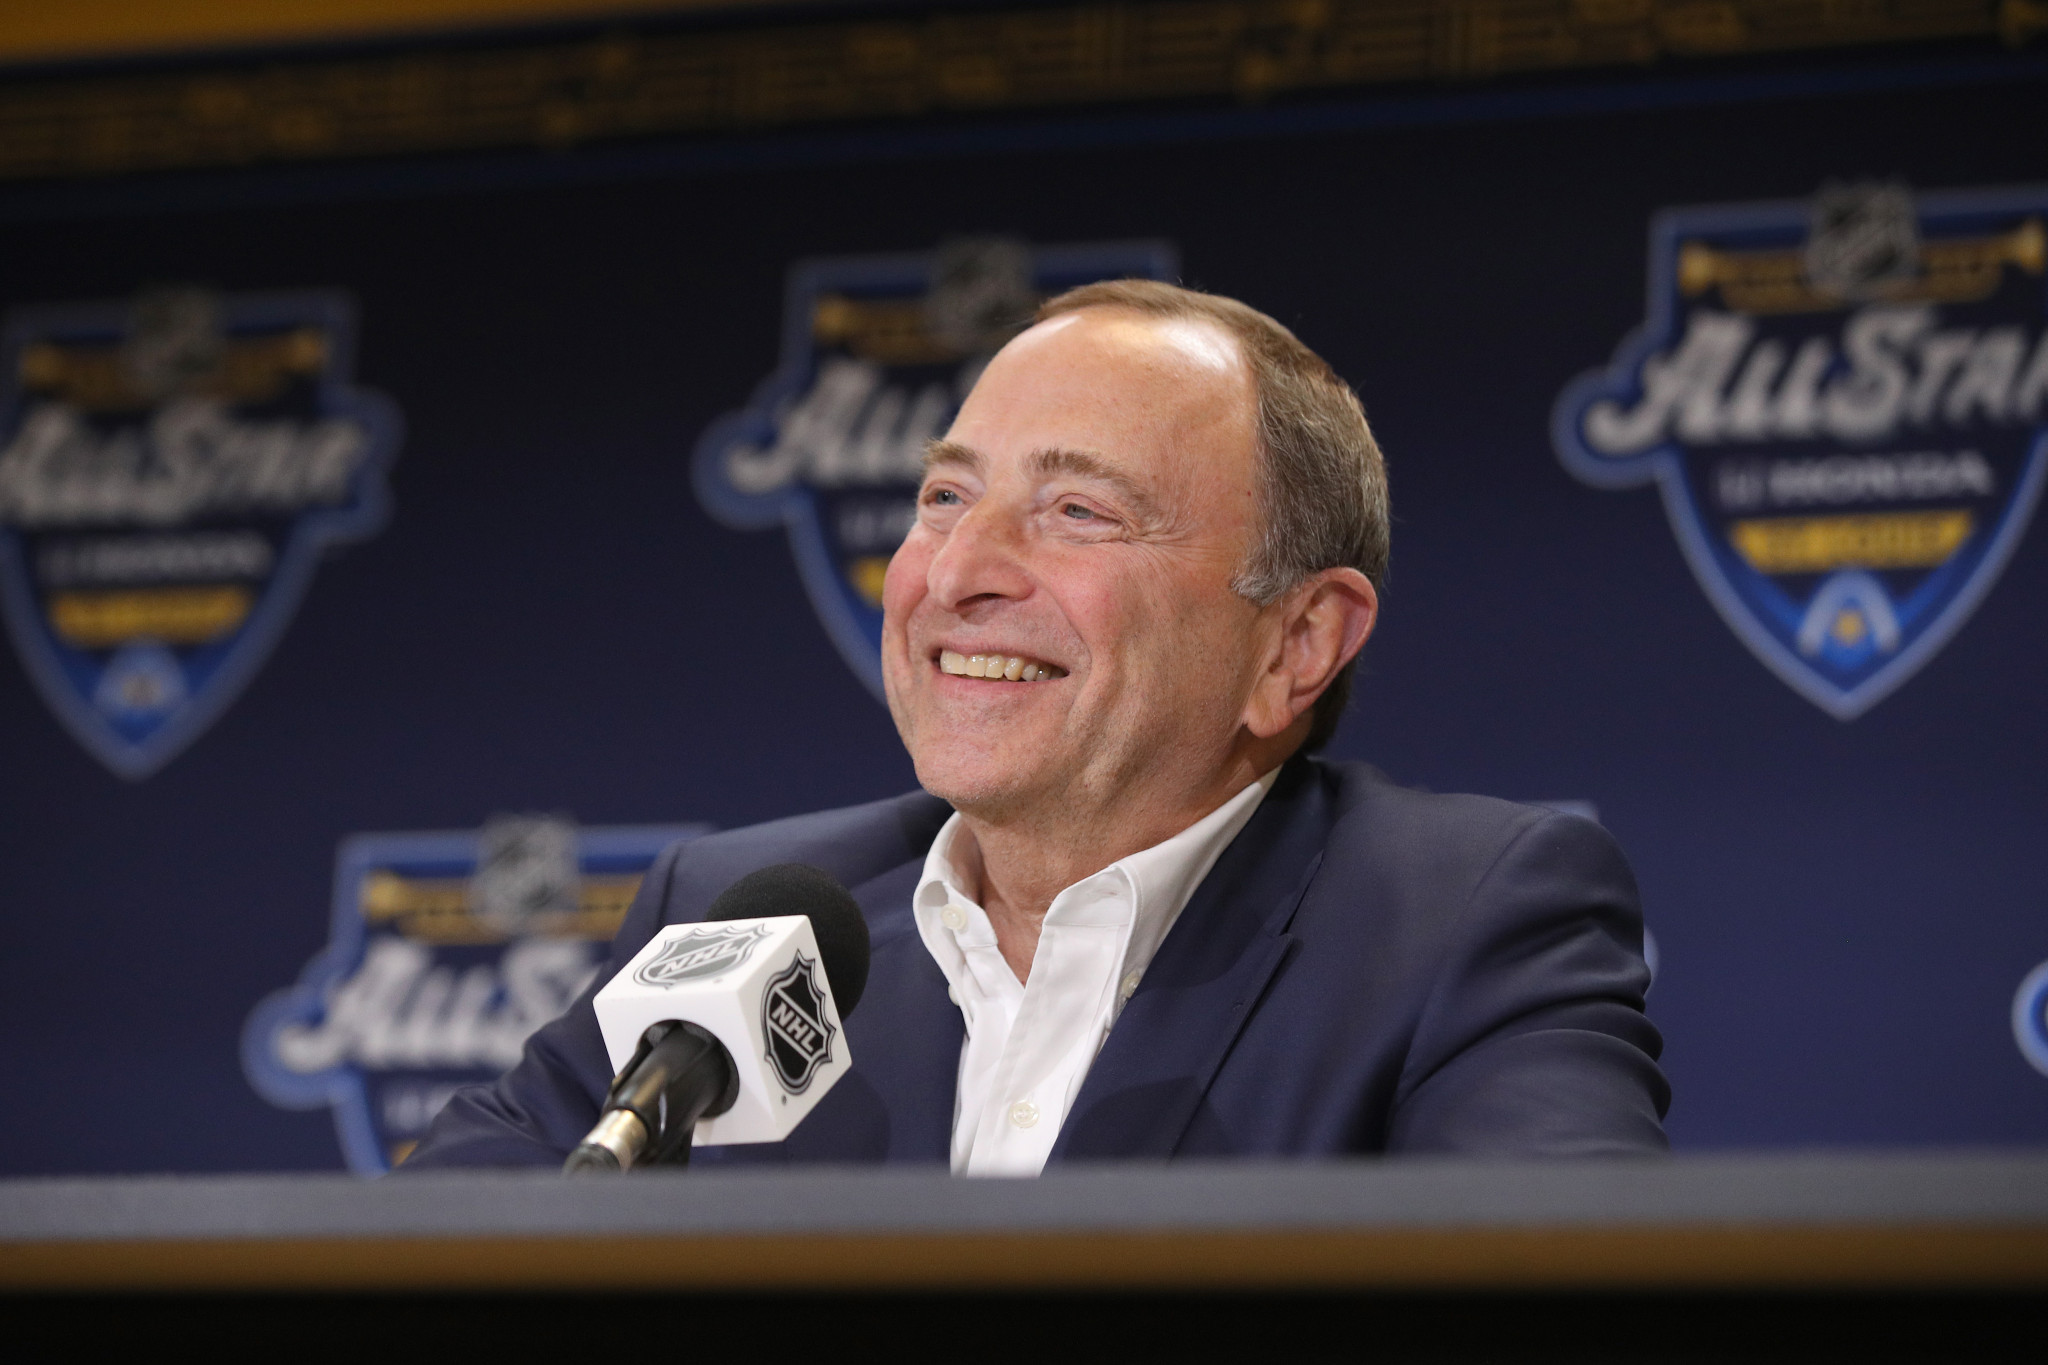 Gary Bettman said the NHL would be "very comfortable" with not going to Beijing 2022 ©Getty Images